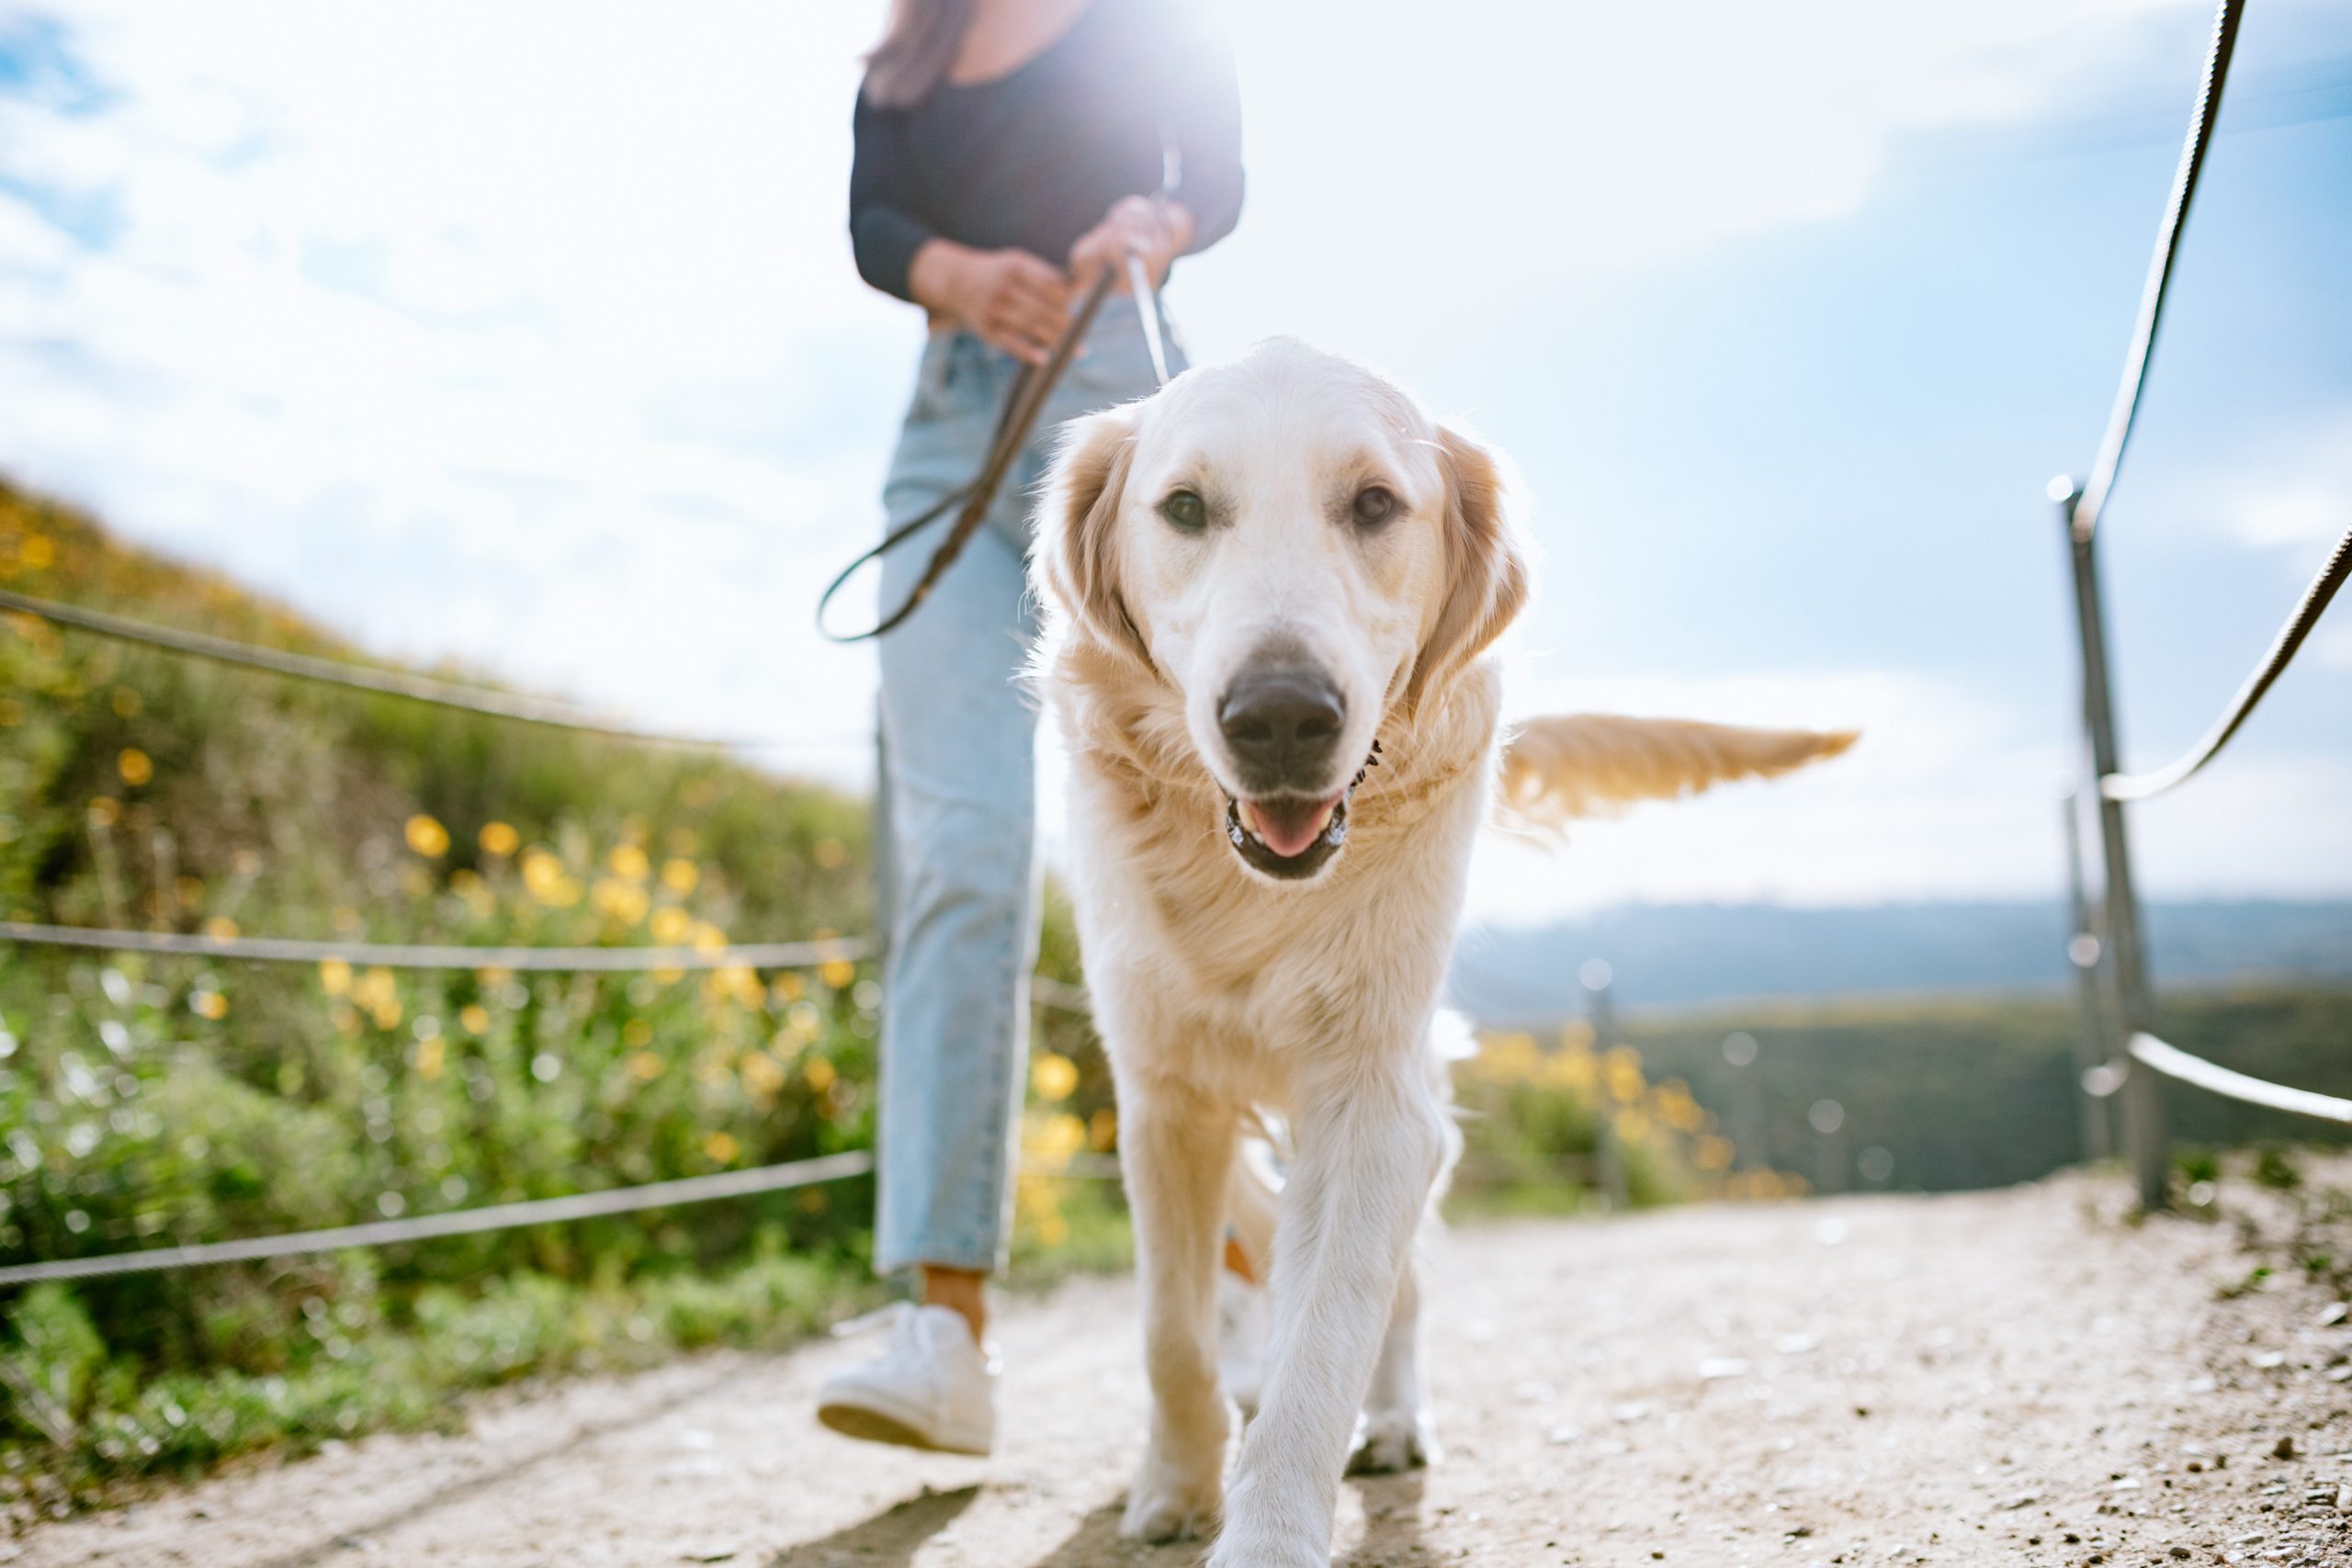 A Golden Retriever gets close up and personal with the camera while outdoors walking with his owner in a Los Angeles county park in California on a sunny day. Relaxation exercise and pet fun at its best.